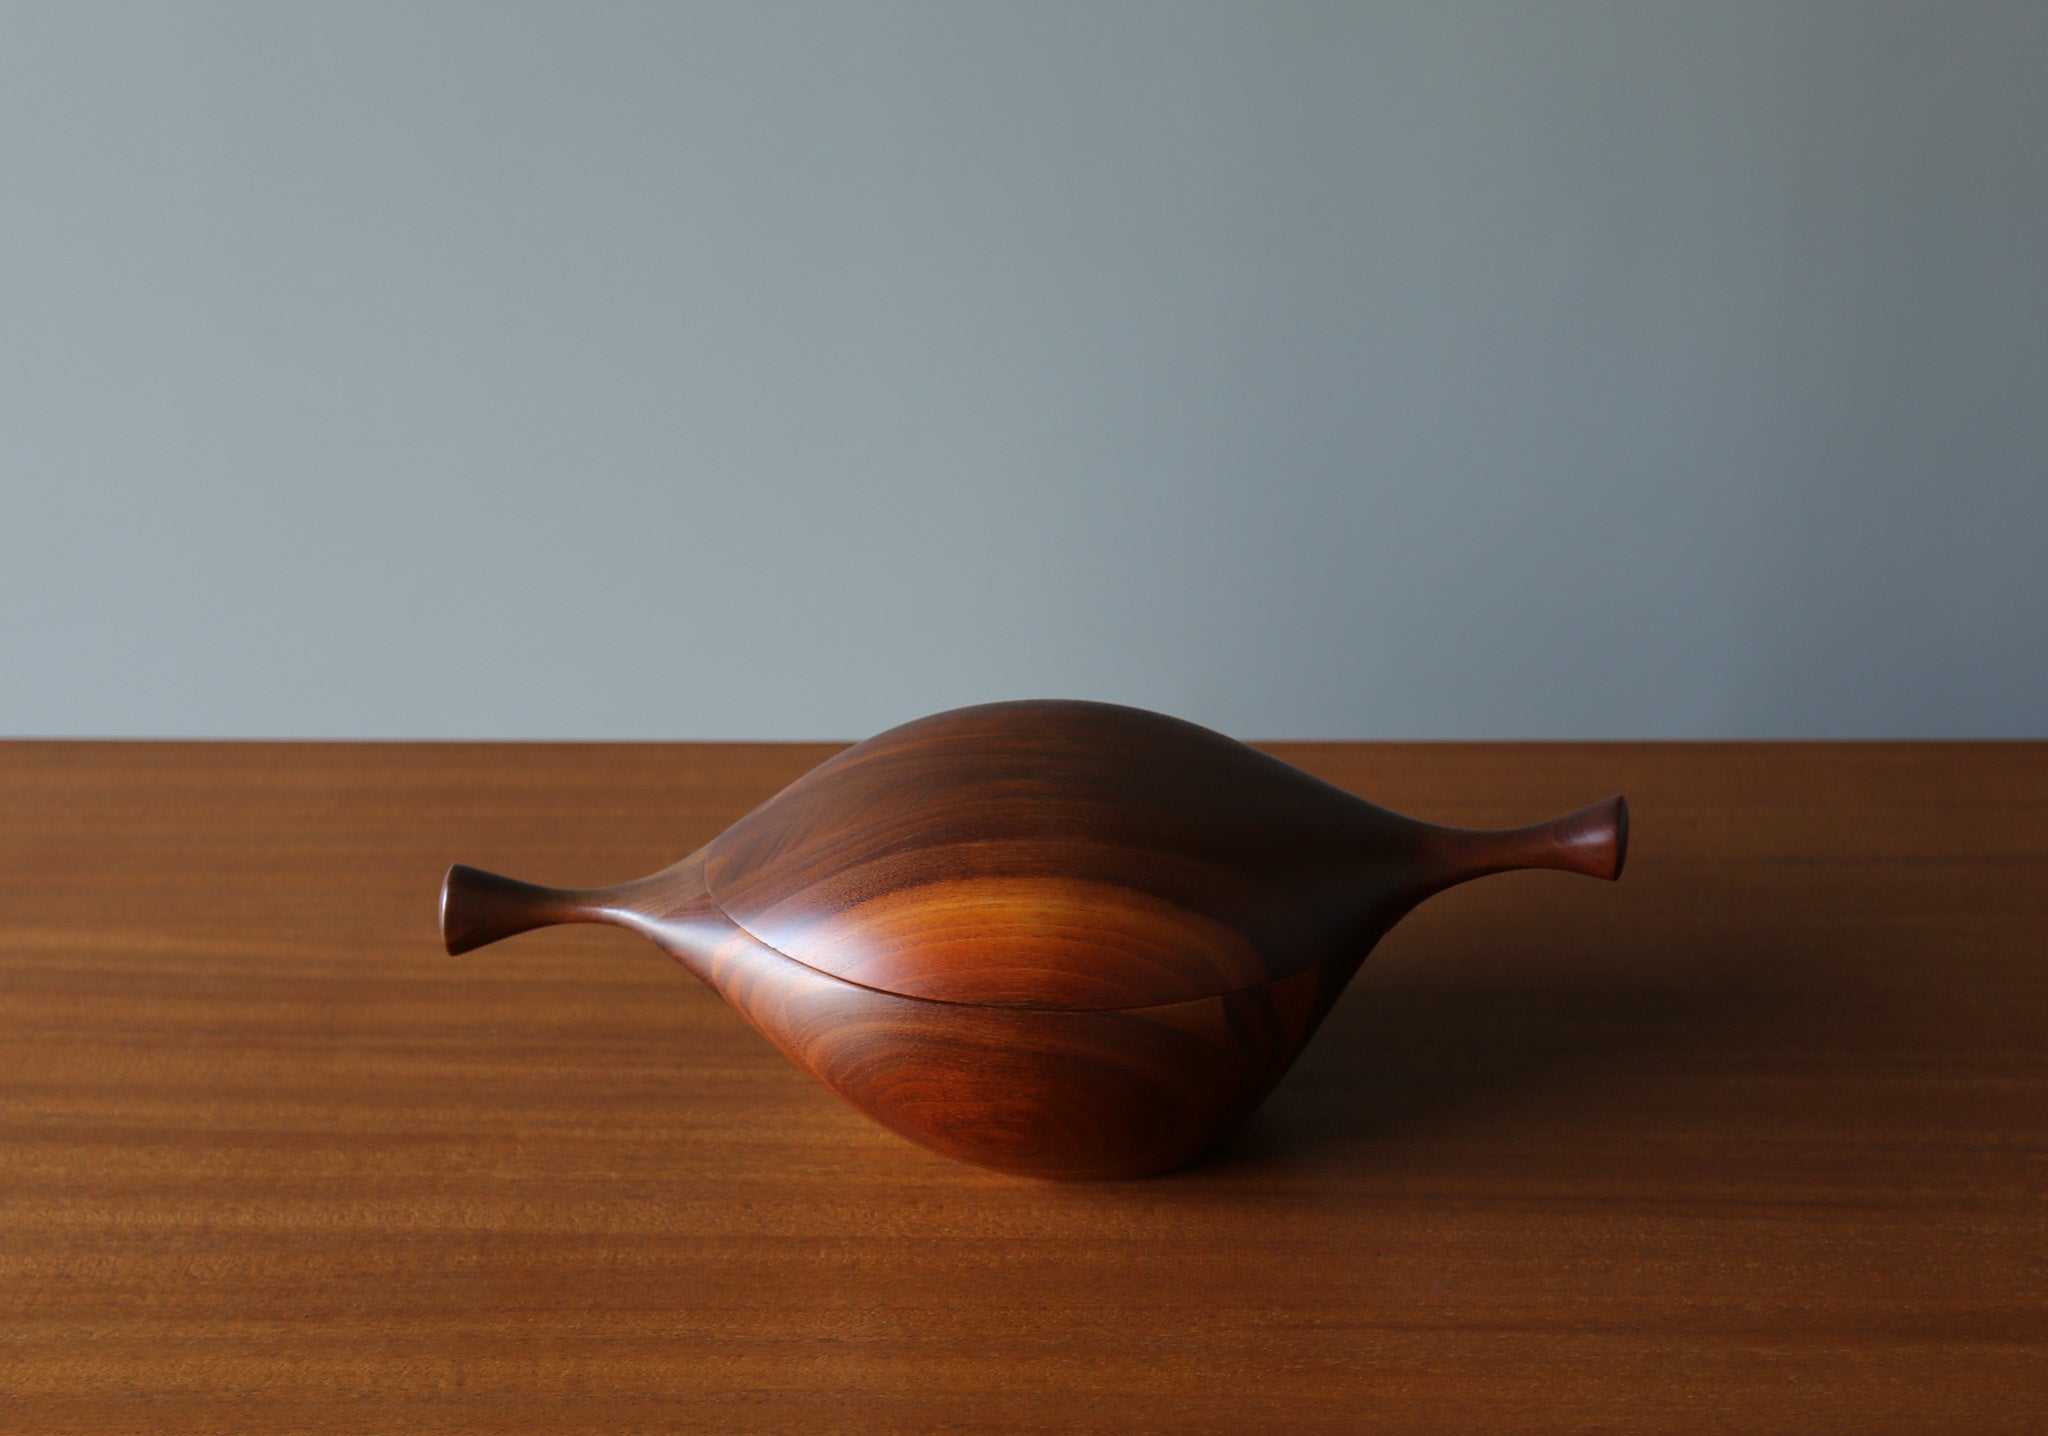 Daniel Loomis Valenza Handcrafted Walnut Covered Bowl, c.1960